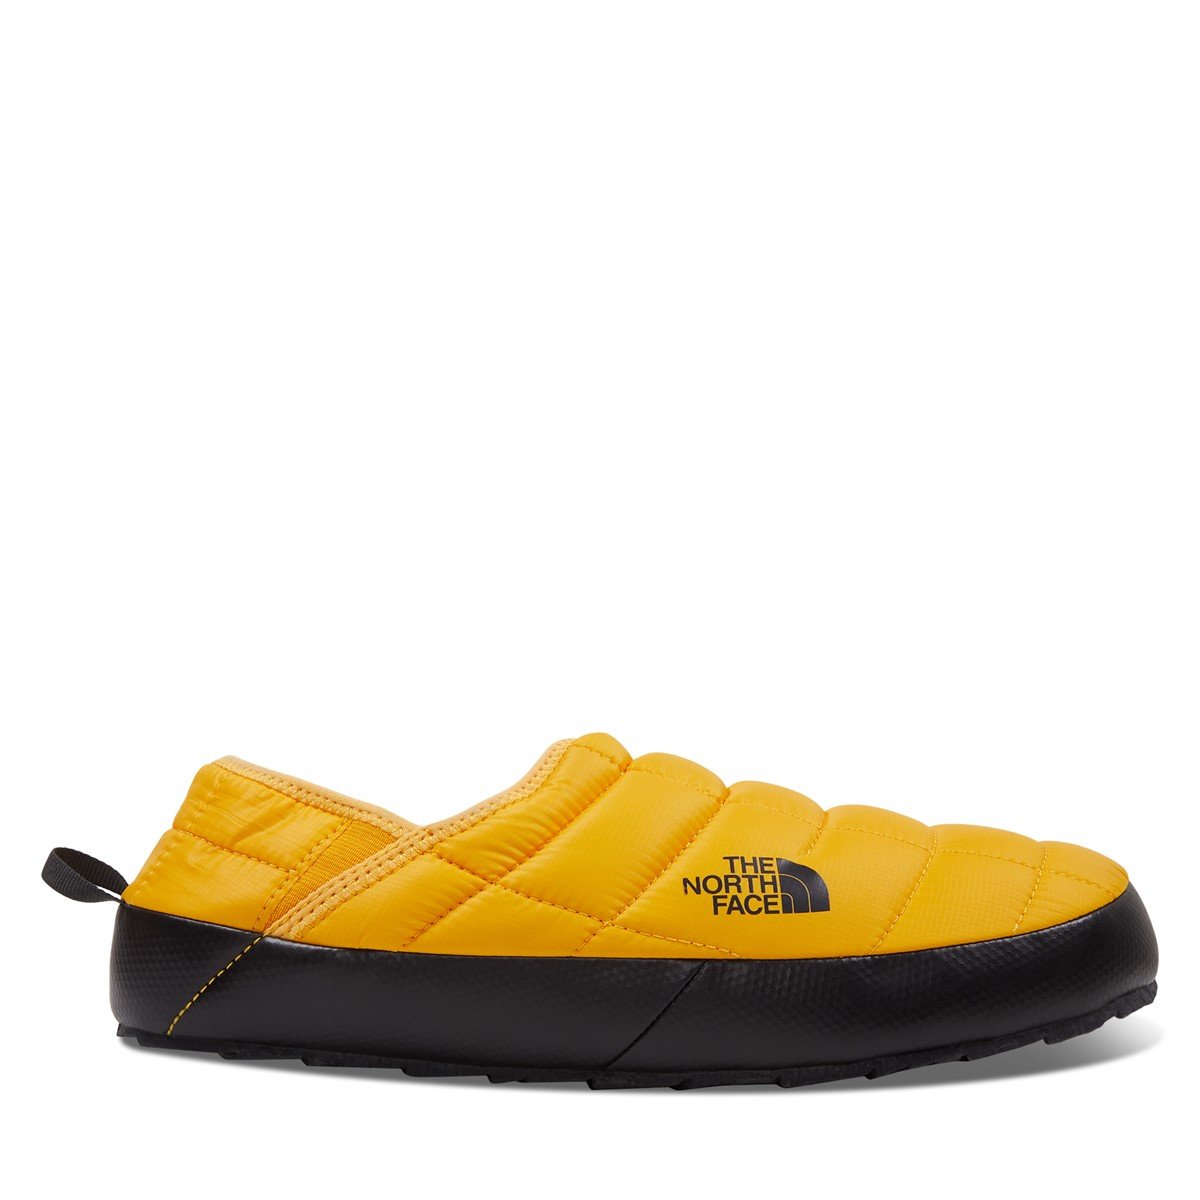 Men's Thermoball Traction Mule IV Slippers in Yellow